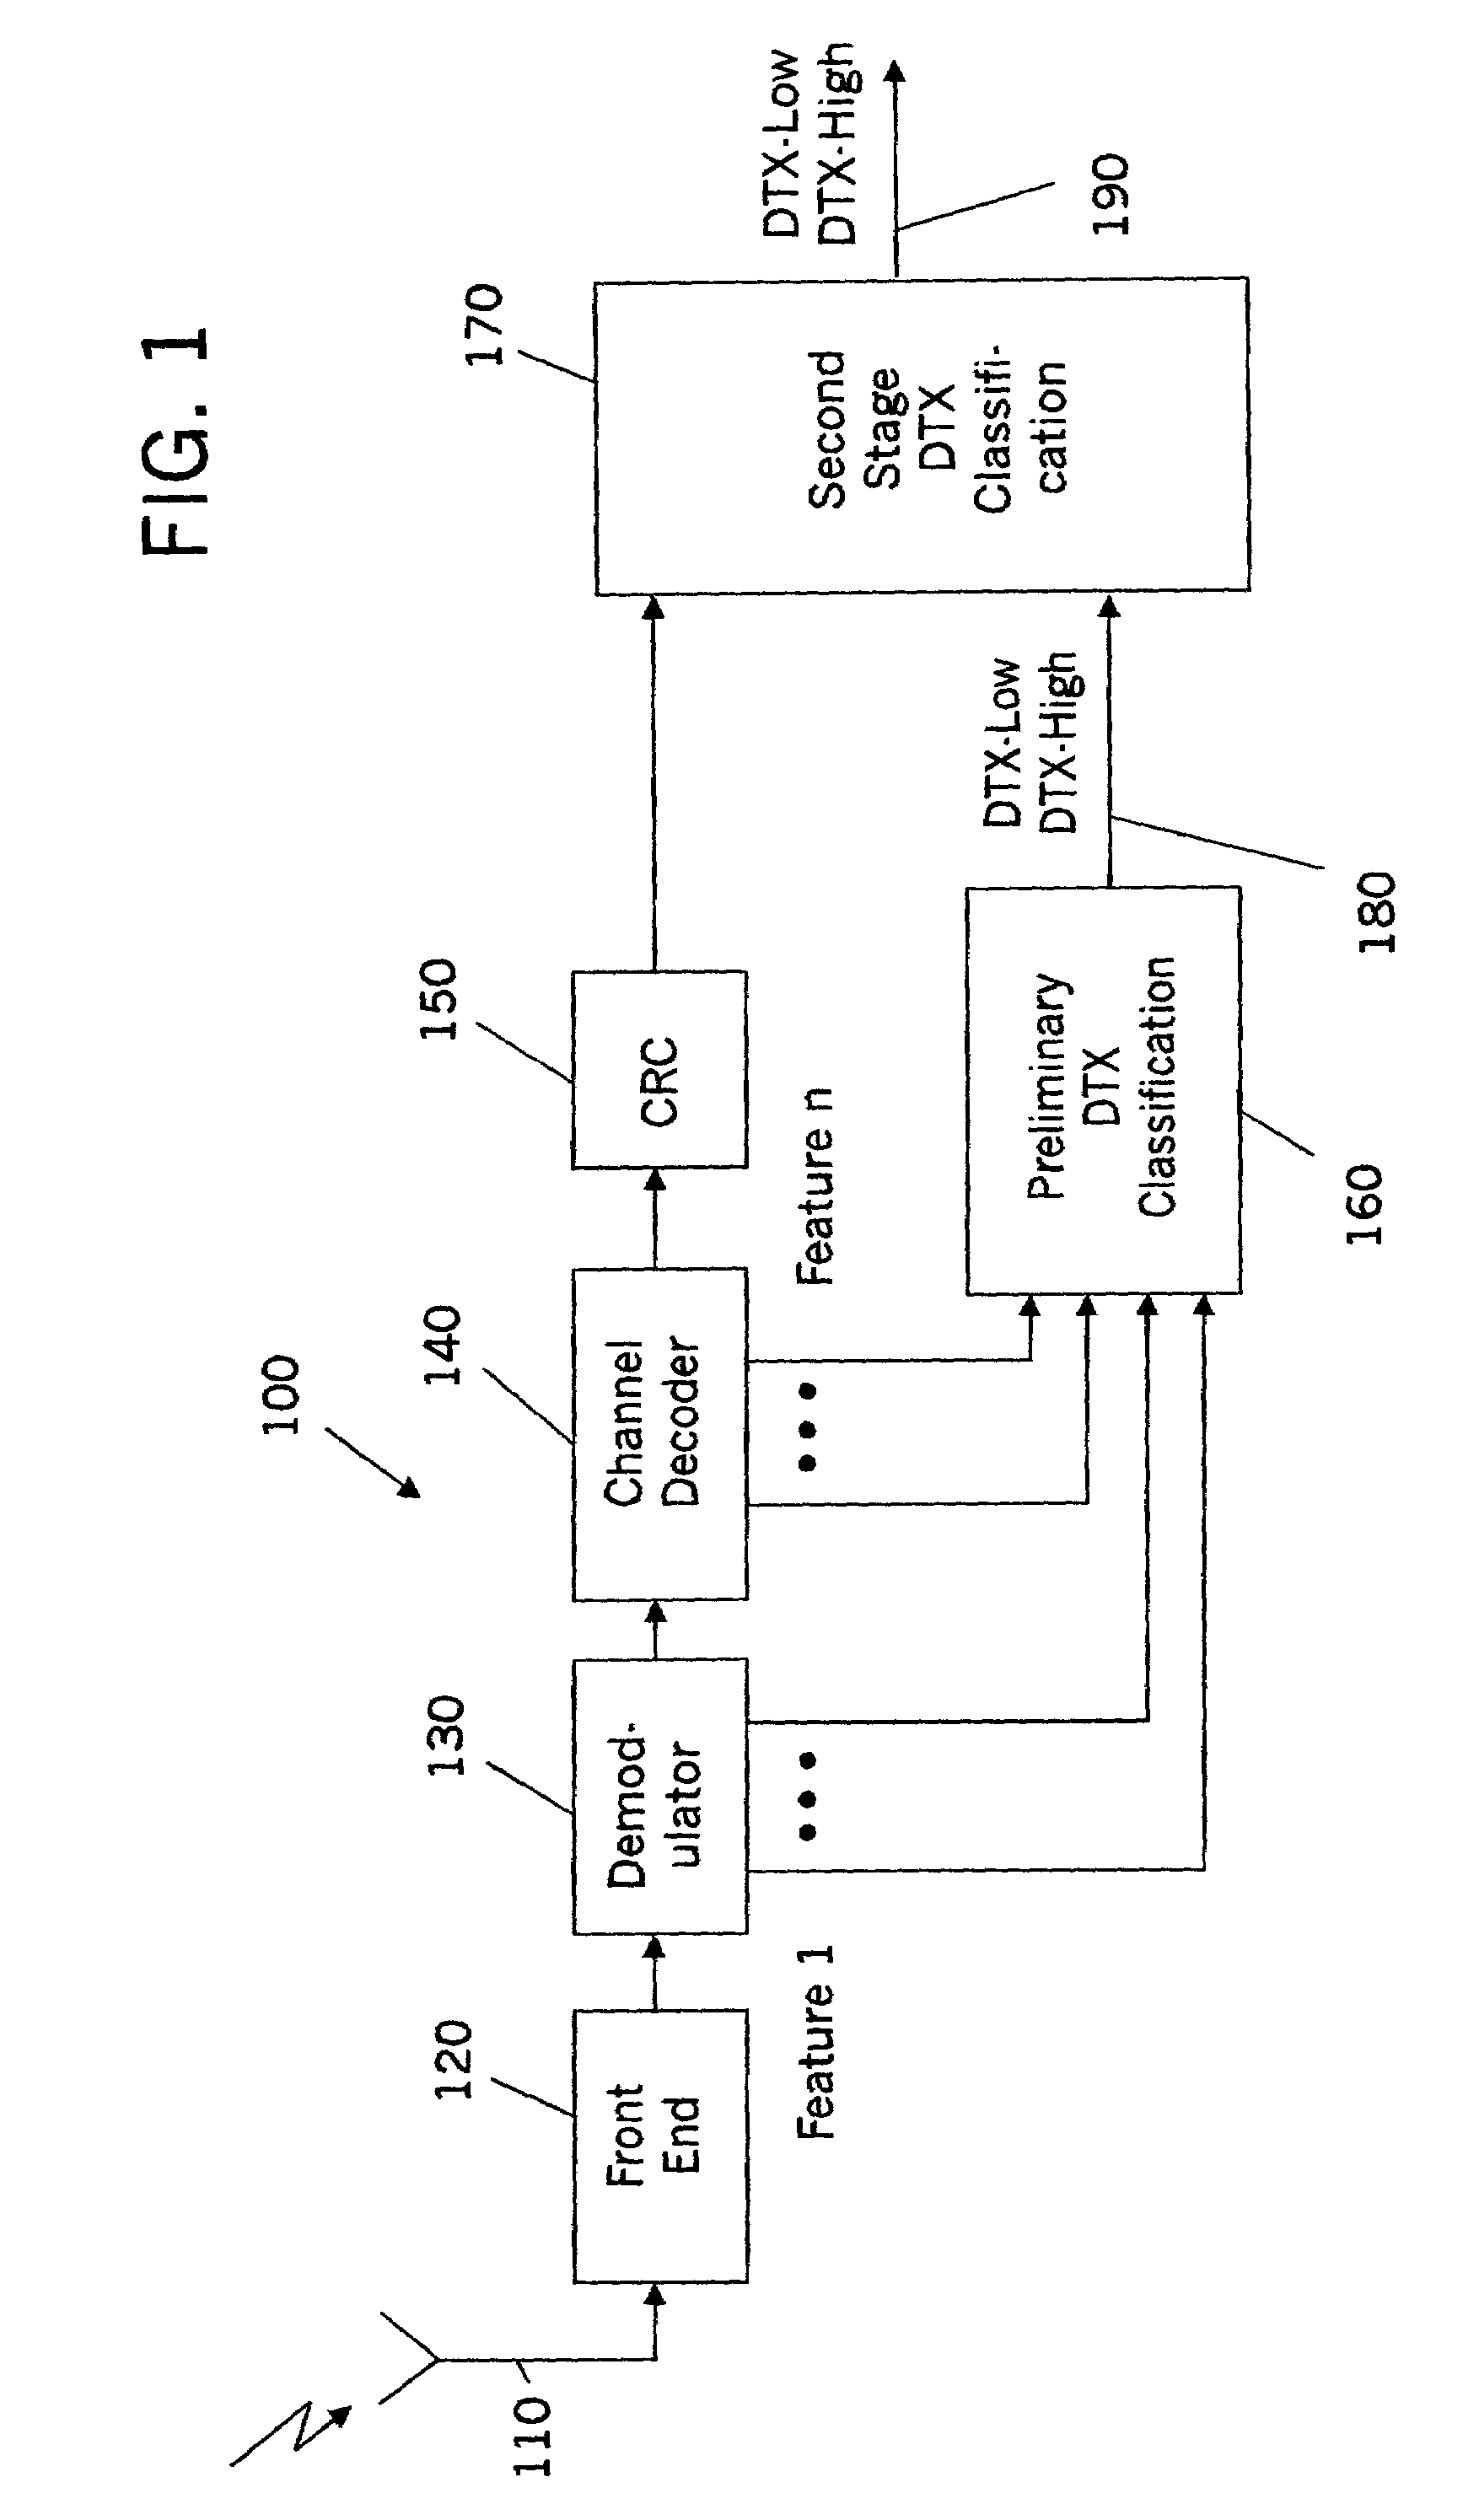 Systems and methods for detecting discontinuous transmission (DTX) using cyclic redundancy check results to modify preliminary DTX classification